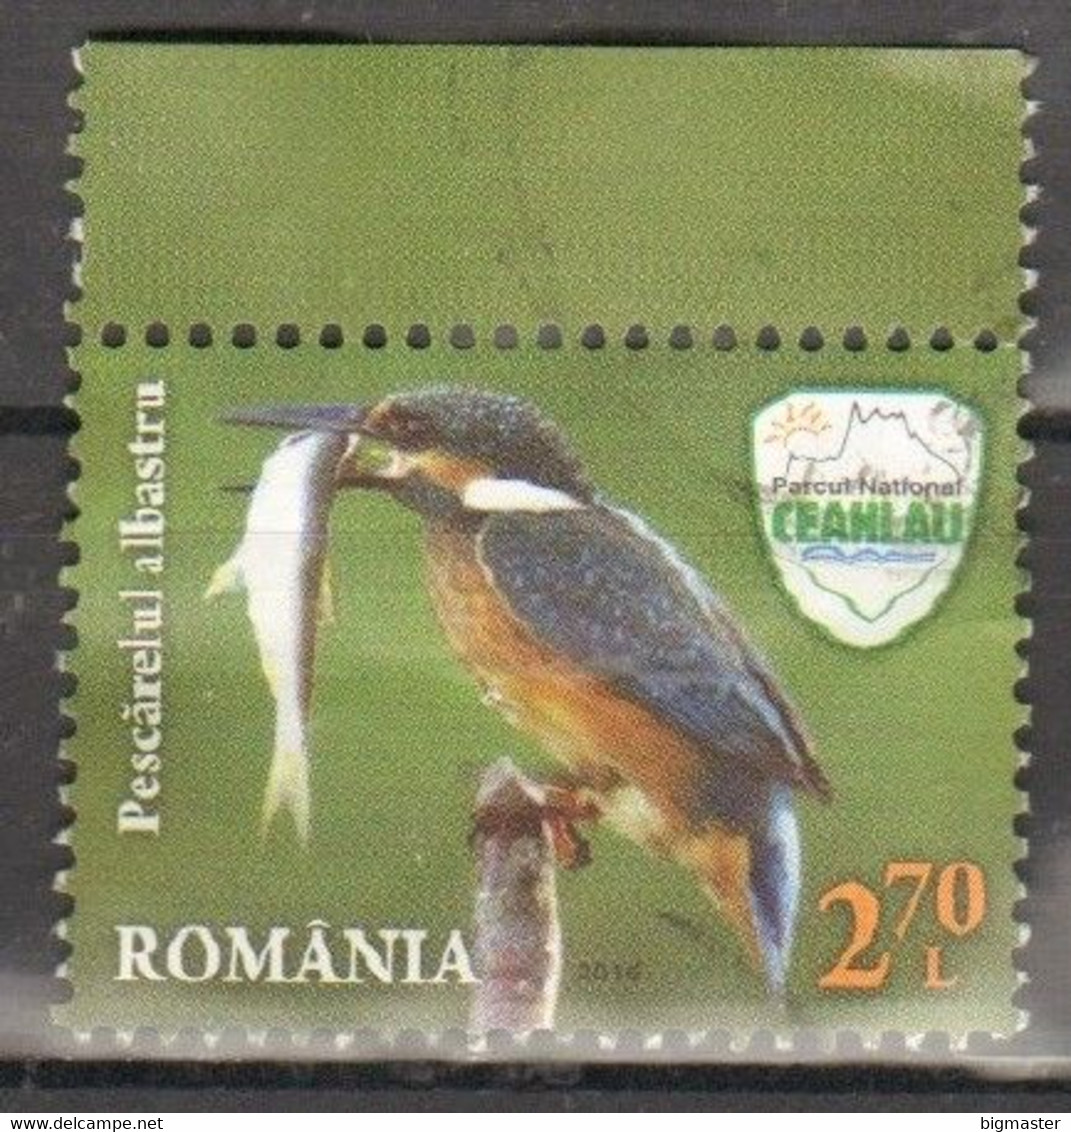 Romania 2016 Love Nature! Ceahlau National Park Bf Fu - Used Stamps